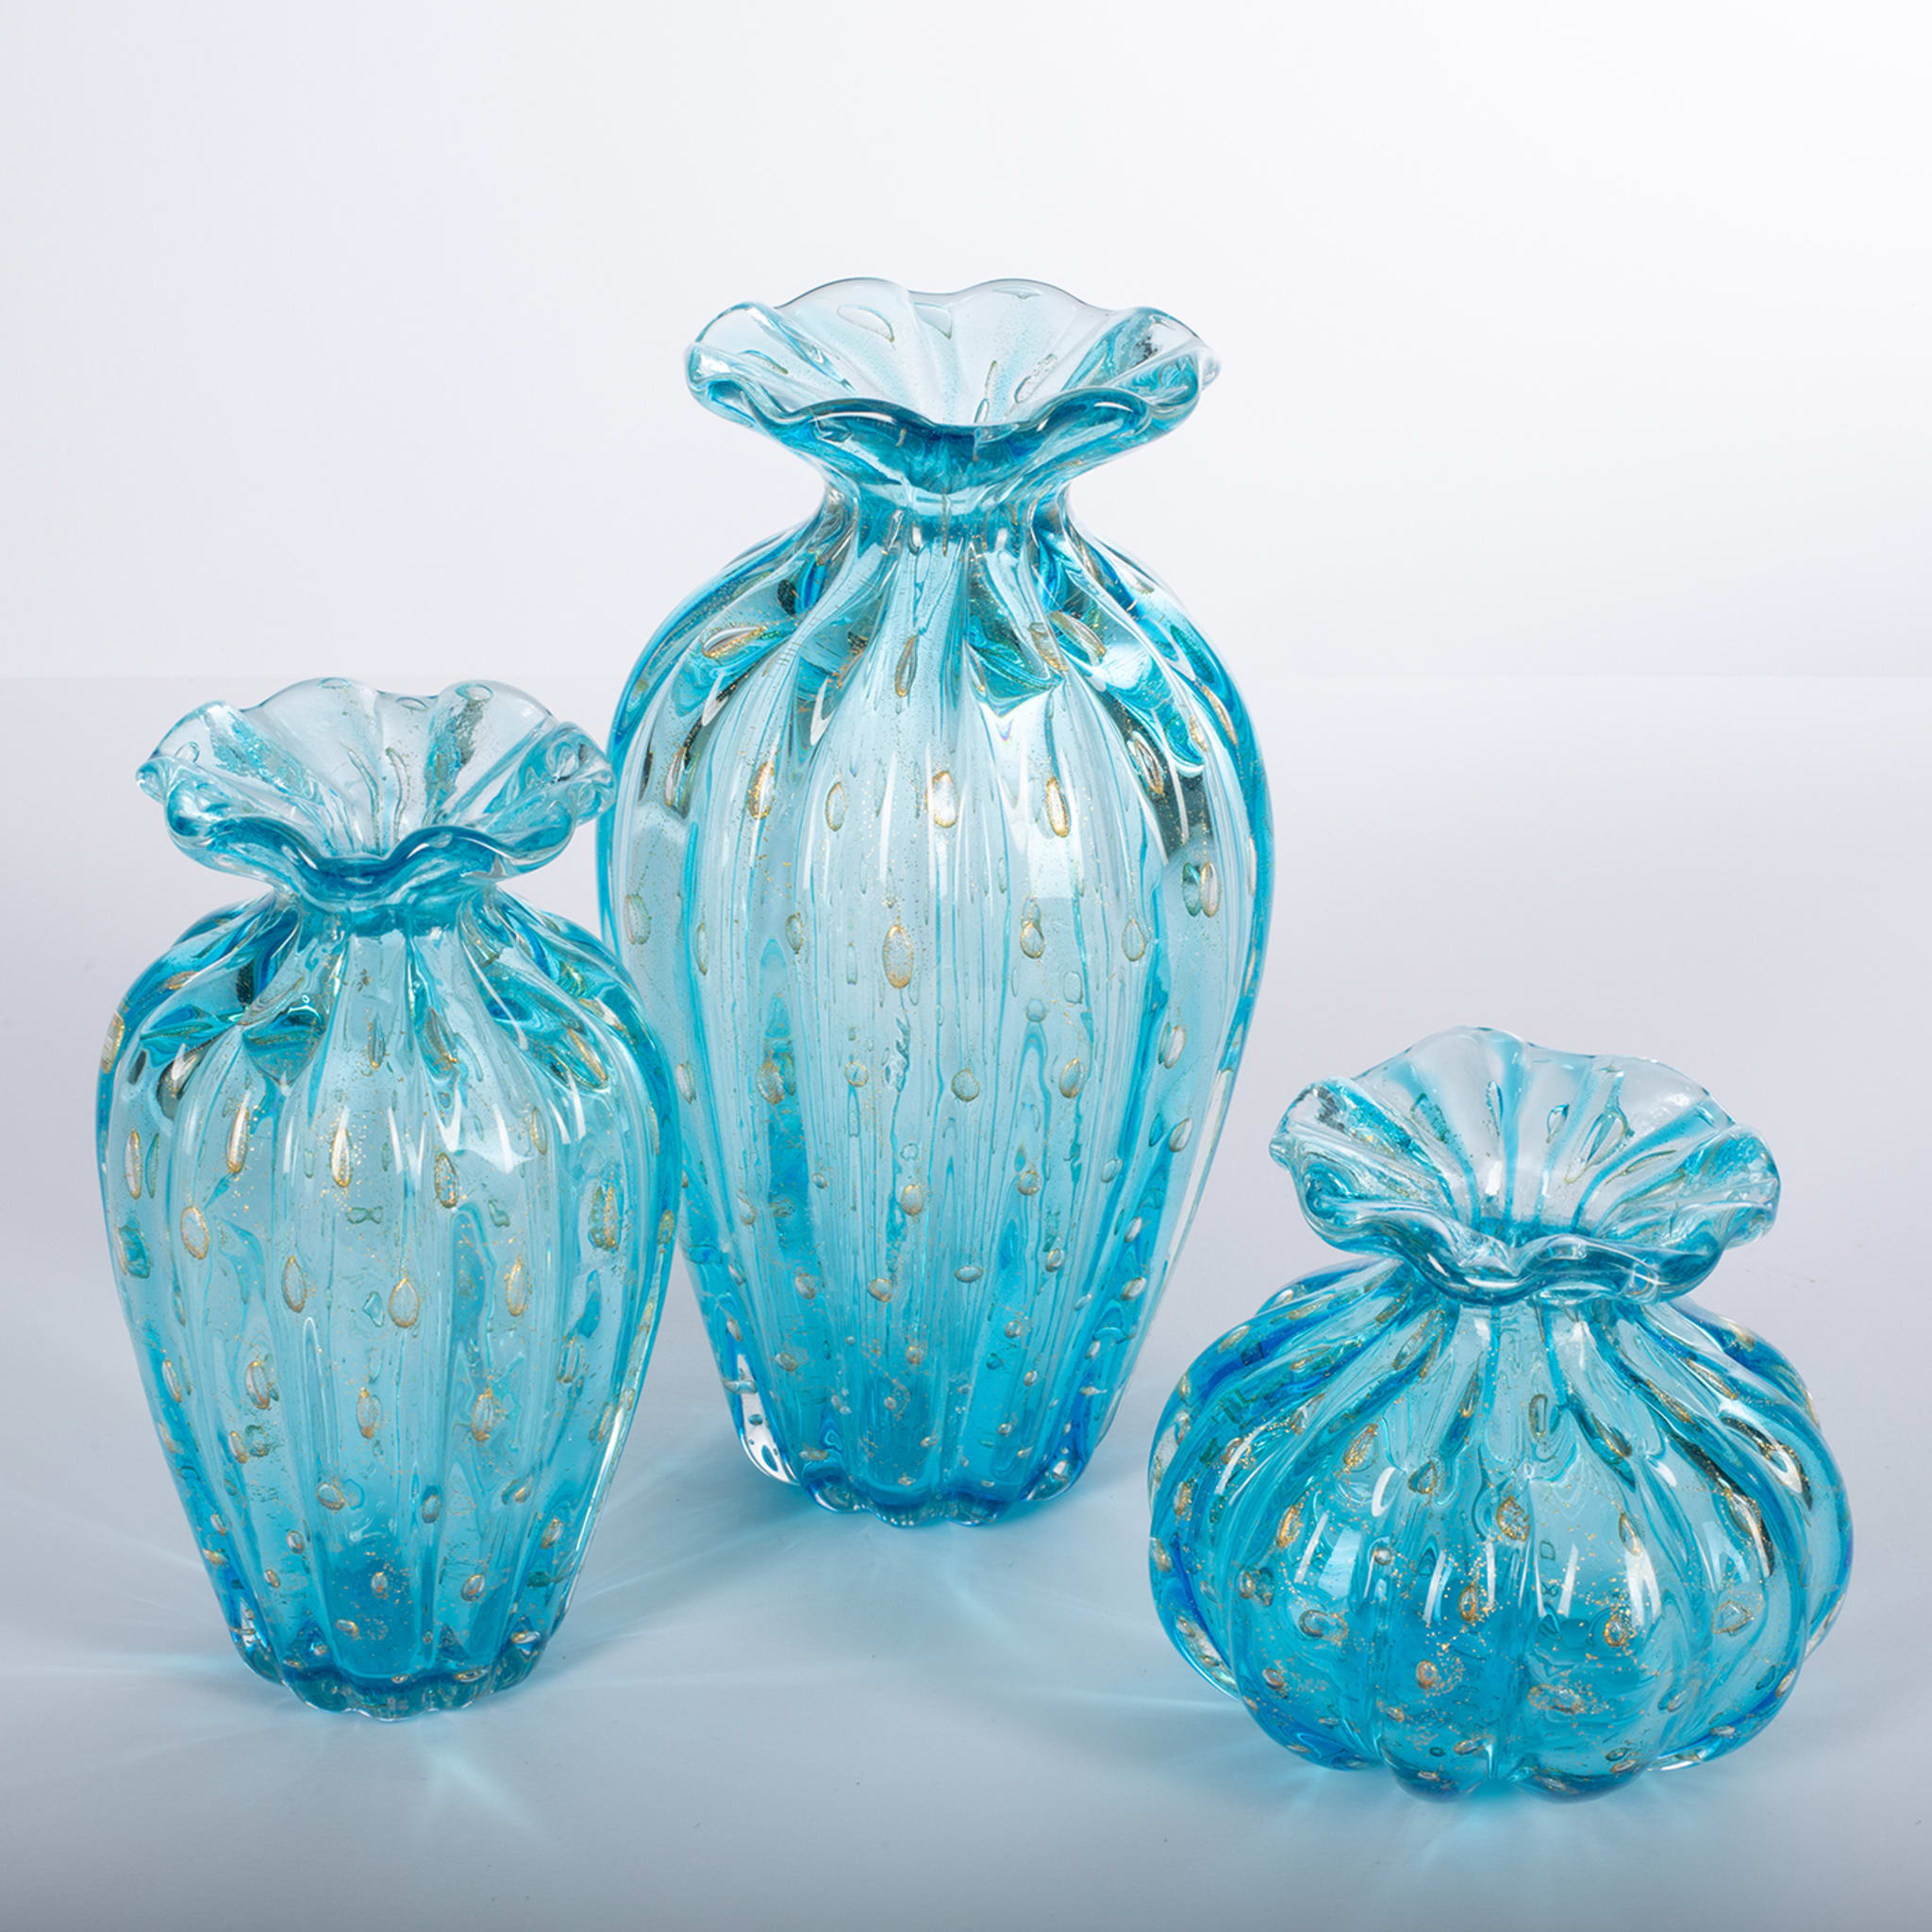 1950 Light-Blue Set of 3 Vases with Gold Bubbles - Alternative view 3